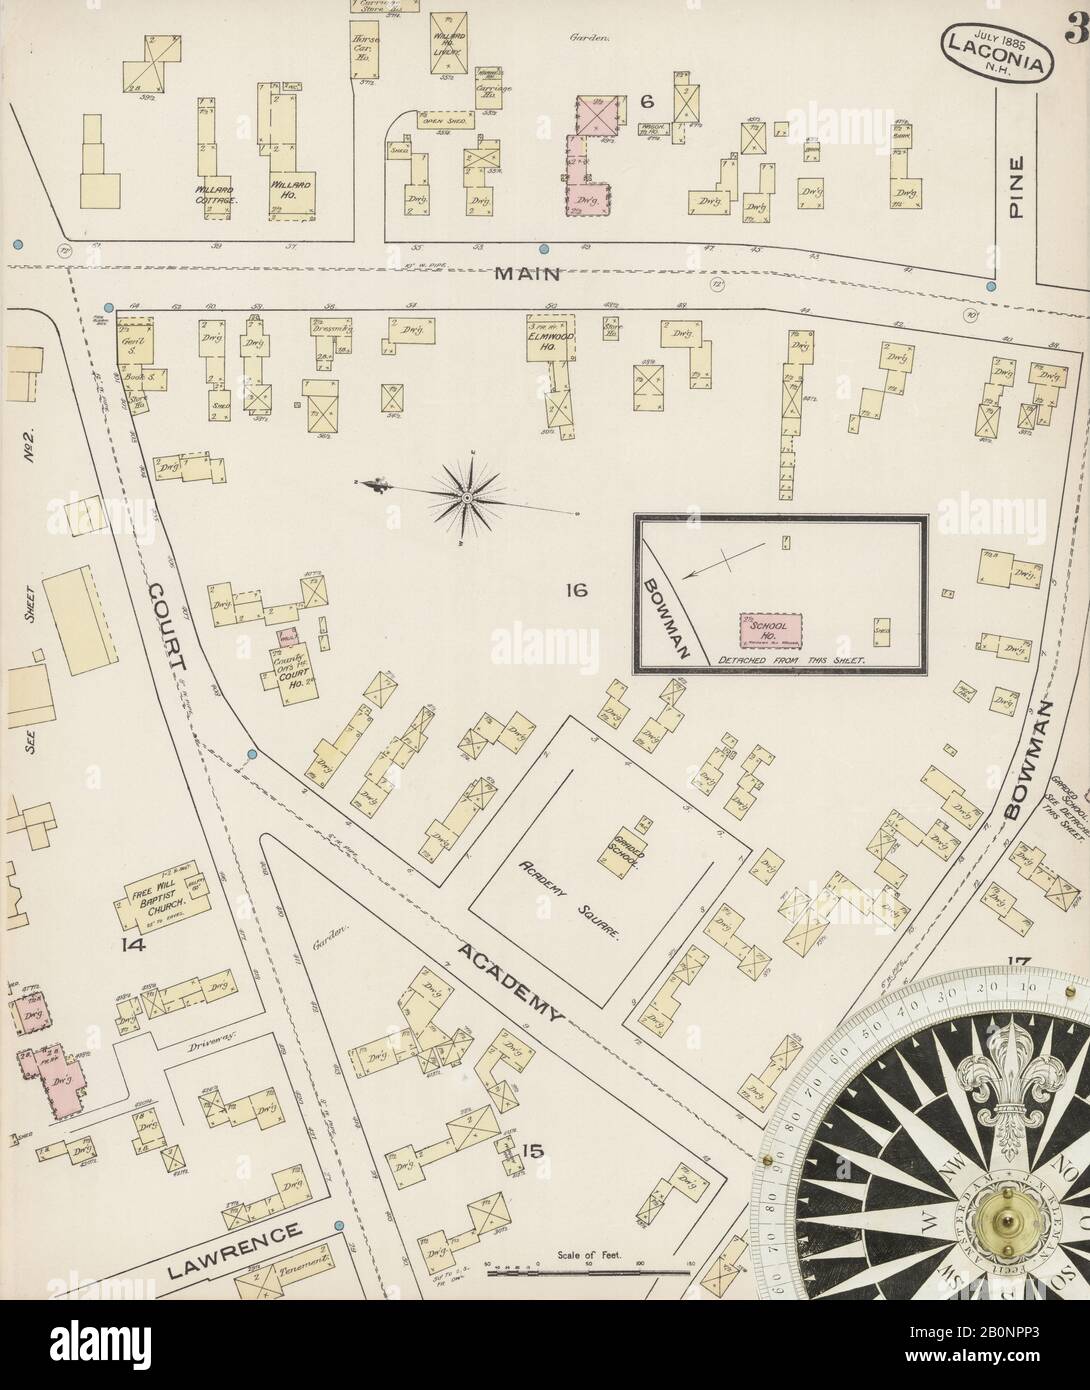 Image 3 of Sanborn Fire Insurance Map from Laconia, Belknap County, New Hampshire. Jul 1885. 3 Sheet(s), America, street map with a Nineteenth Century compass Stock Photo